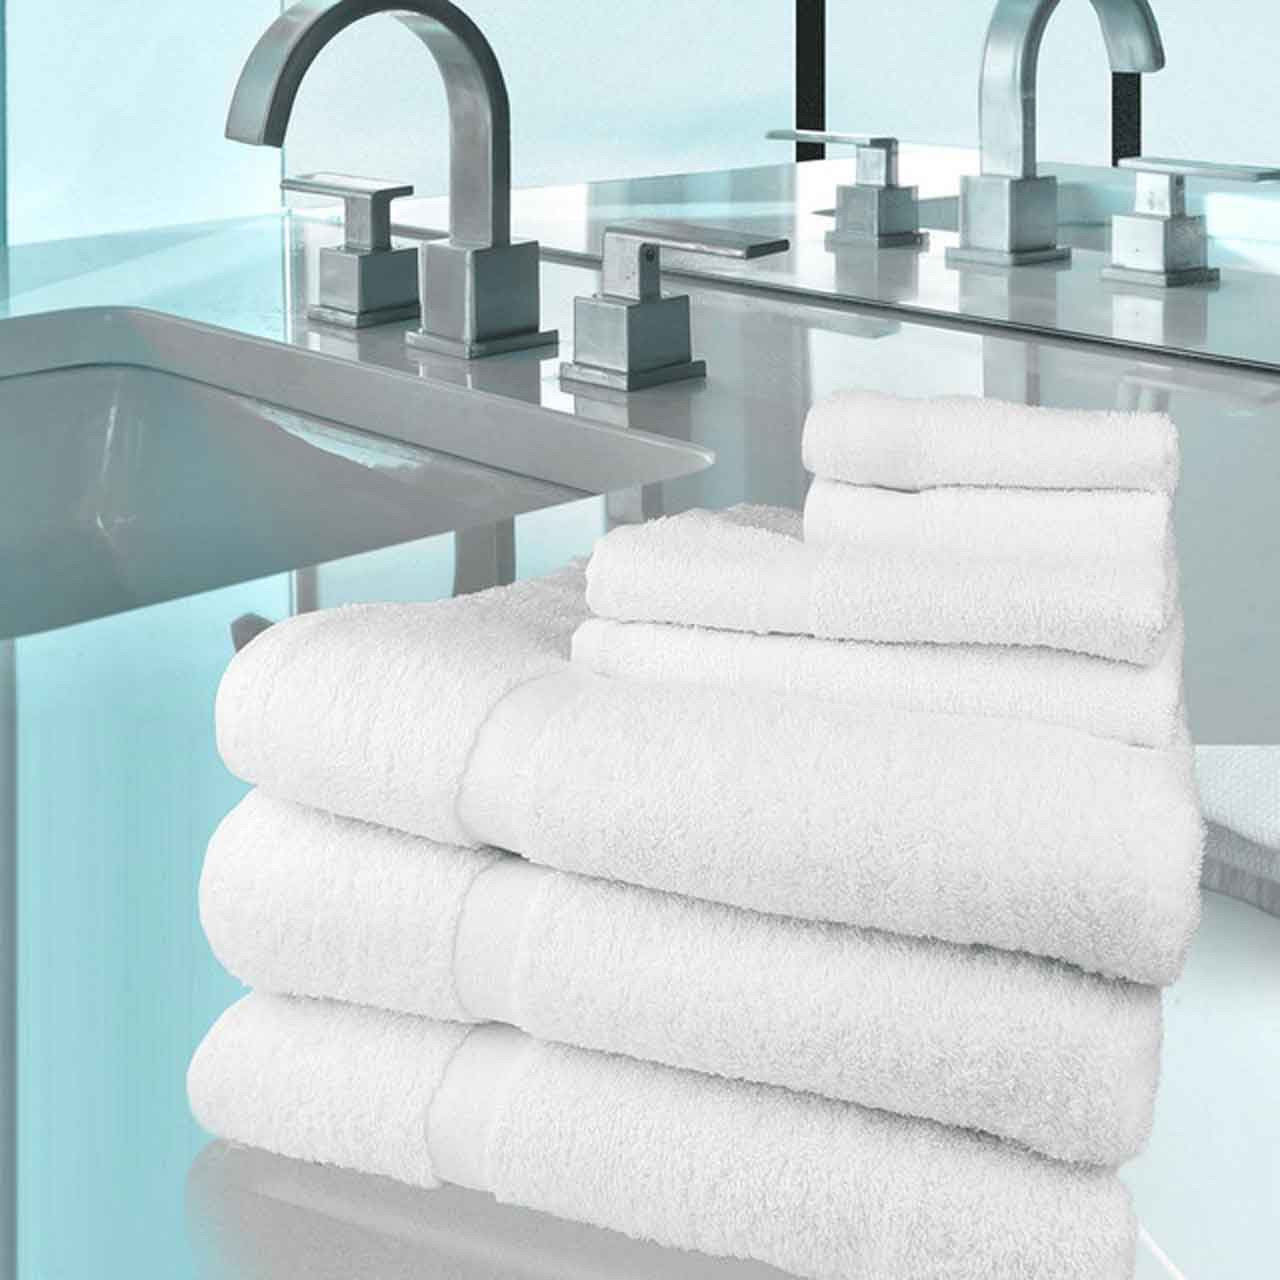 What are the most luxurious towels made of?